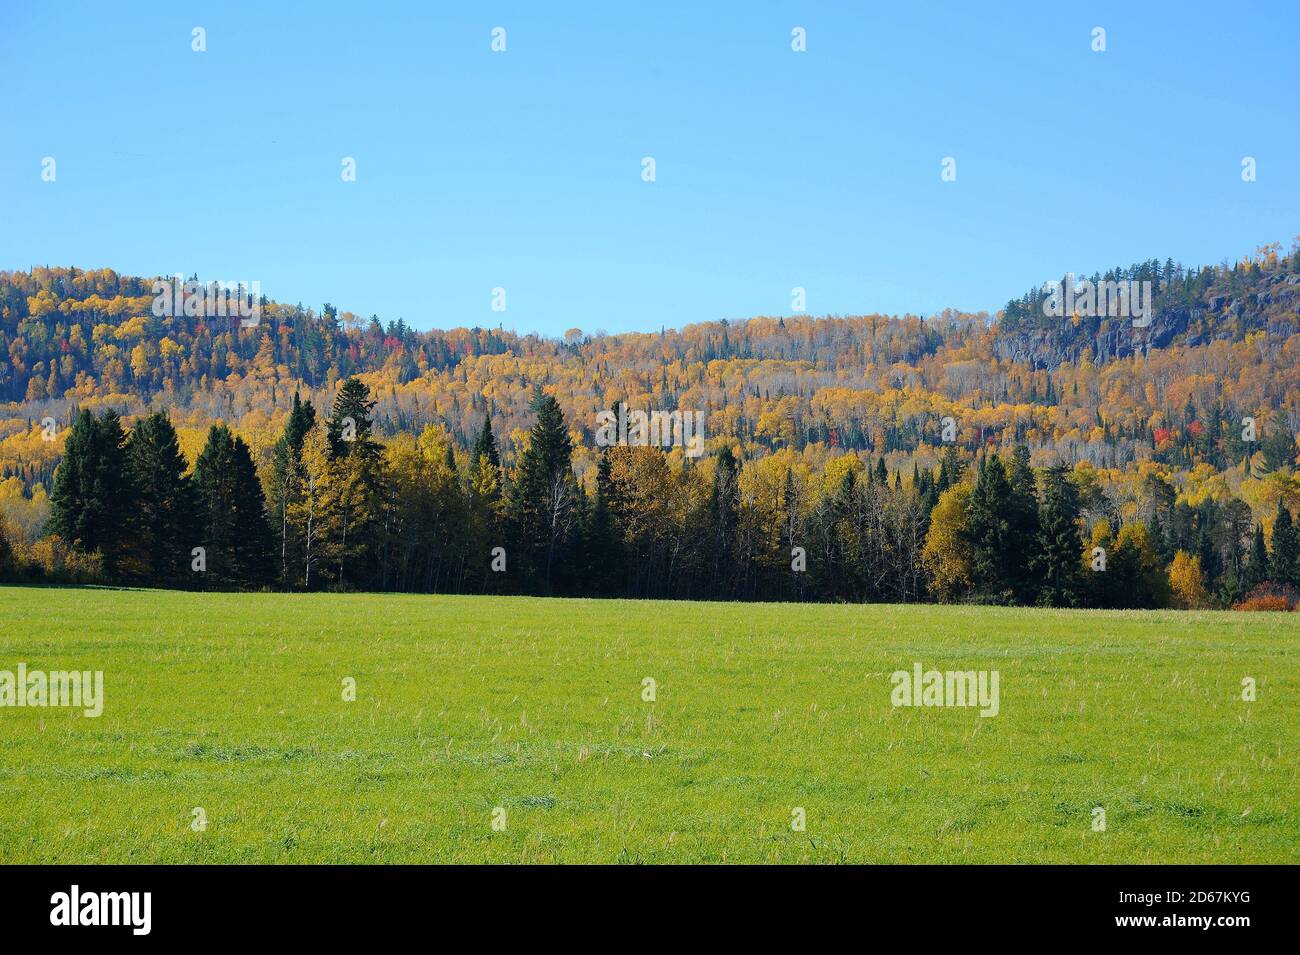 Autumn hills or gold and evergreens with green grass in the foreground on a sunny day.in Ontario, Canada. Stock Photo